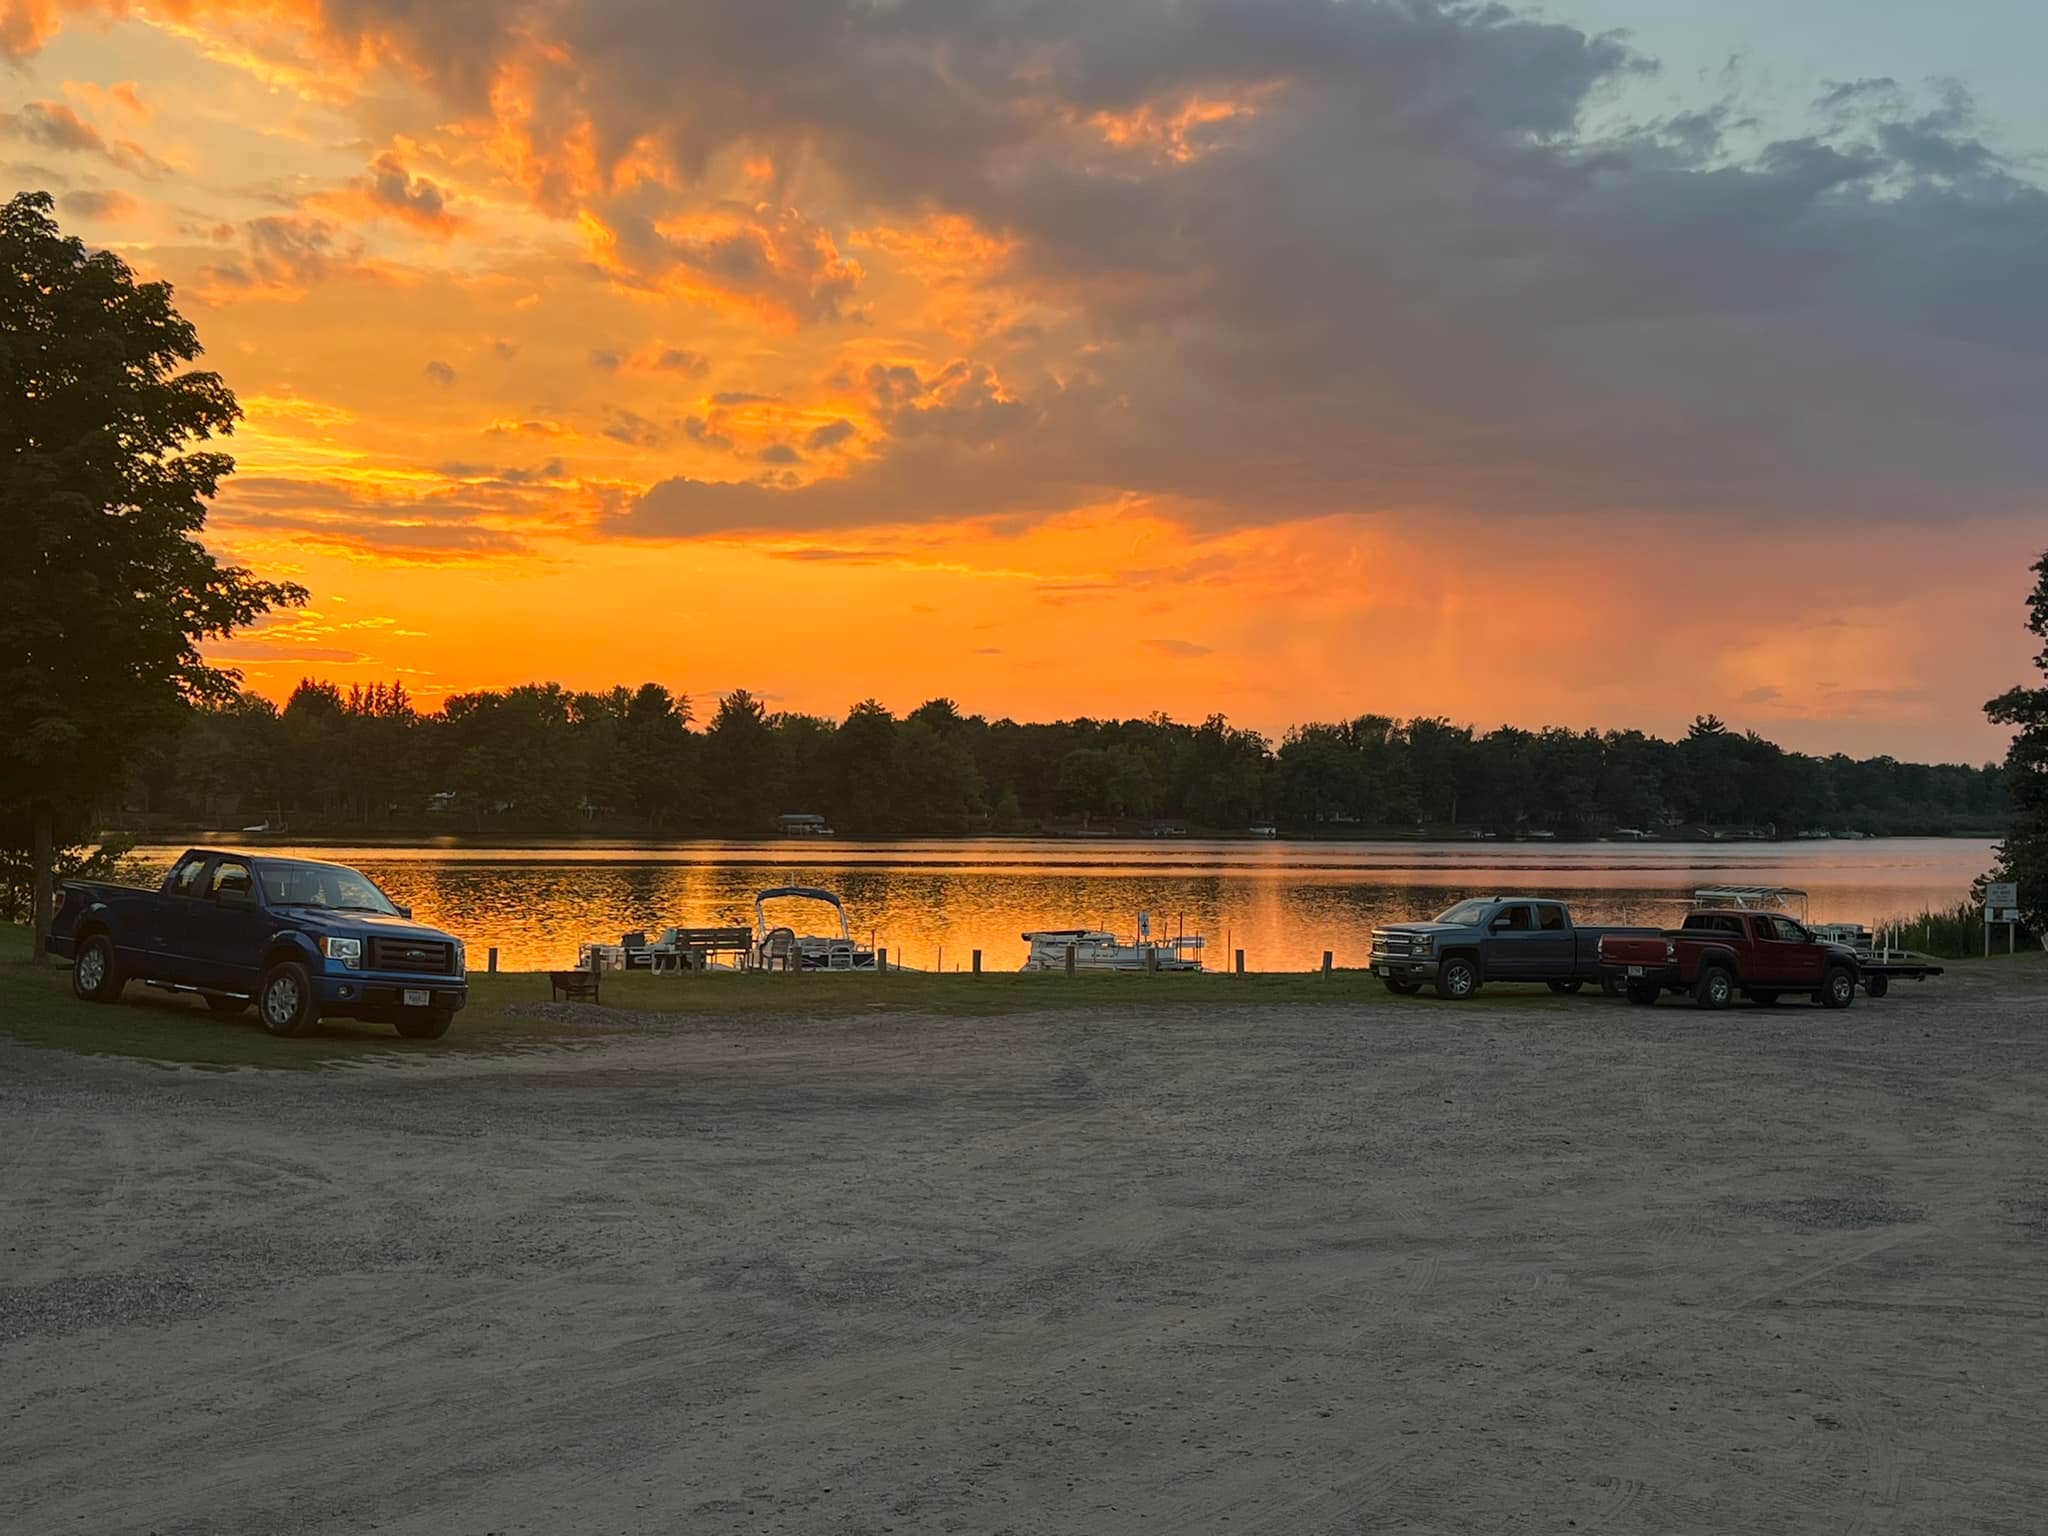 Camper submitted image from Poskin Lake Resort - 2